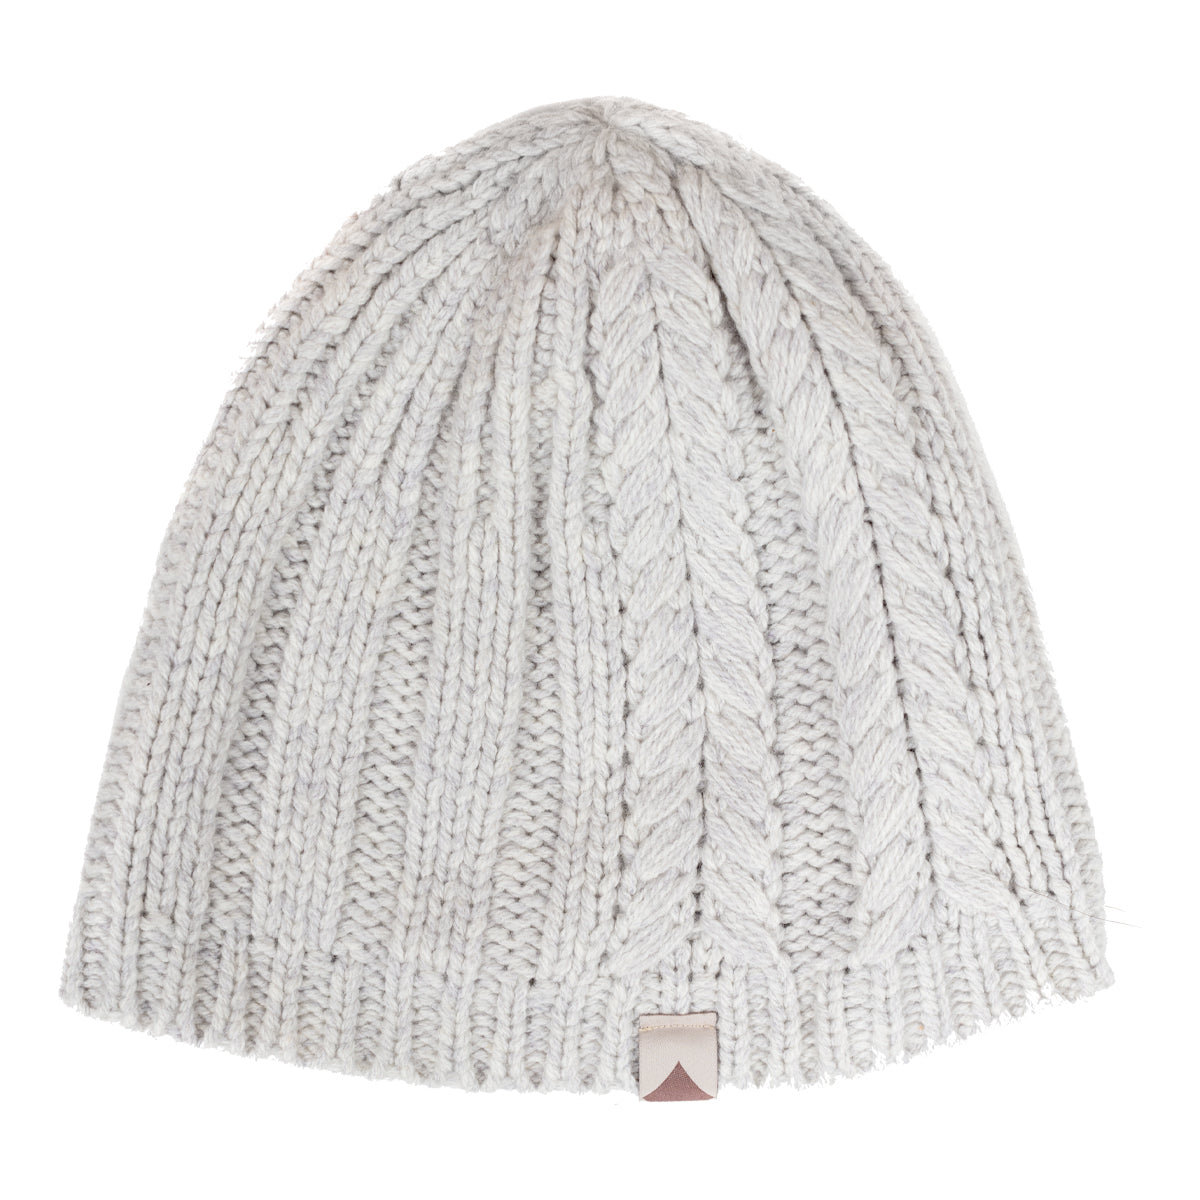 Azyre Inspire Beanie in  by GOHUNT | Azyre - GOHUNT Shop